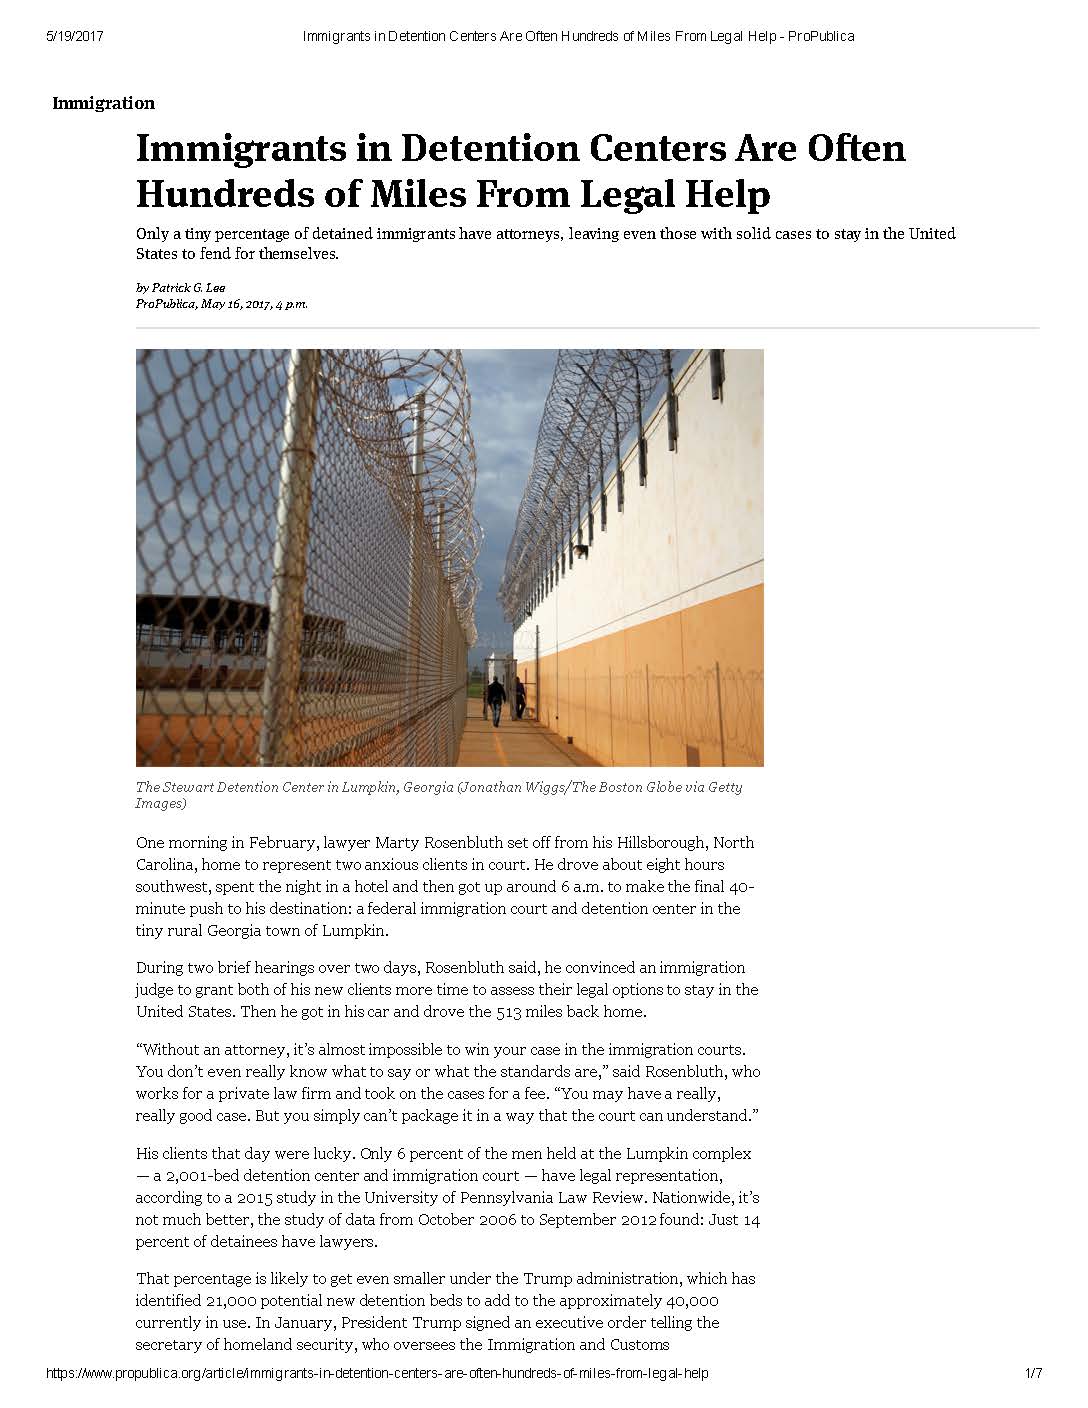 2017.05.15 Immigrants in Detention Centers Are Often Hundreds of Miles From Legal Help - ProPublica_Page_1.jpg